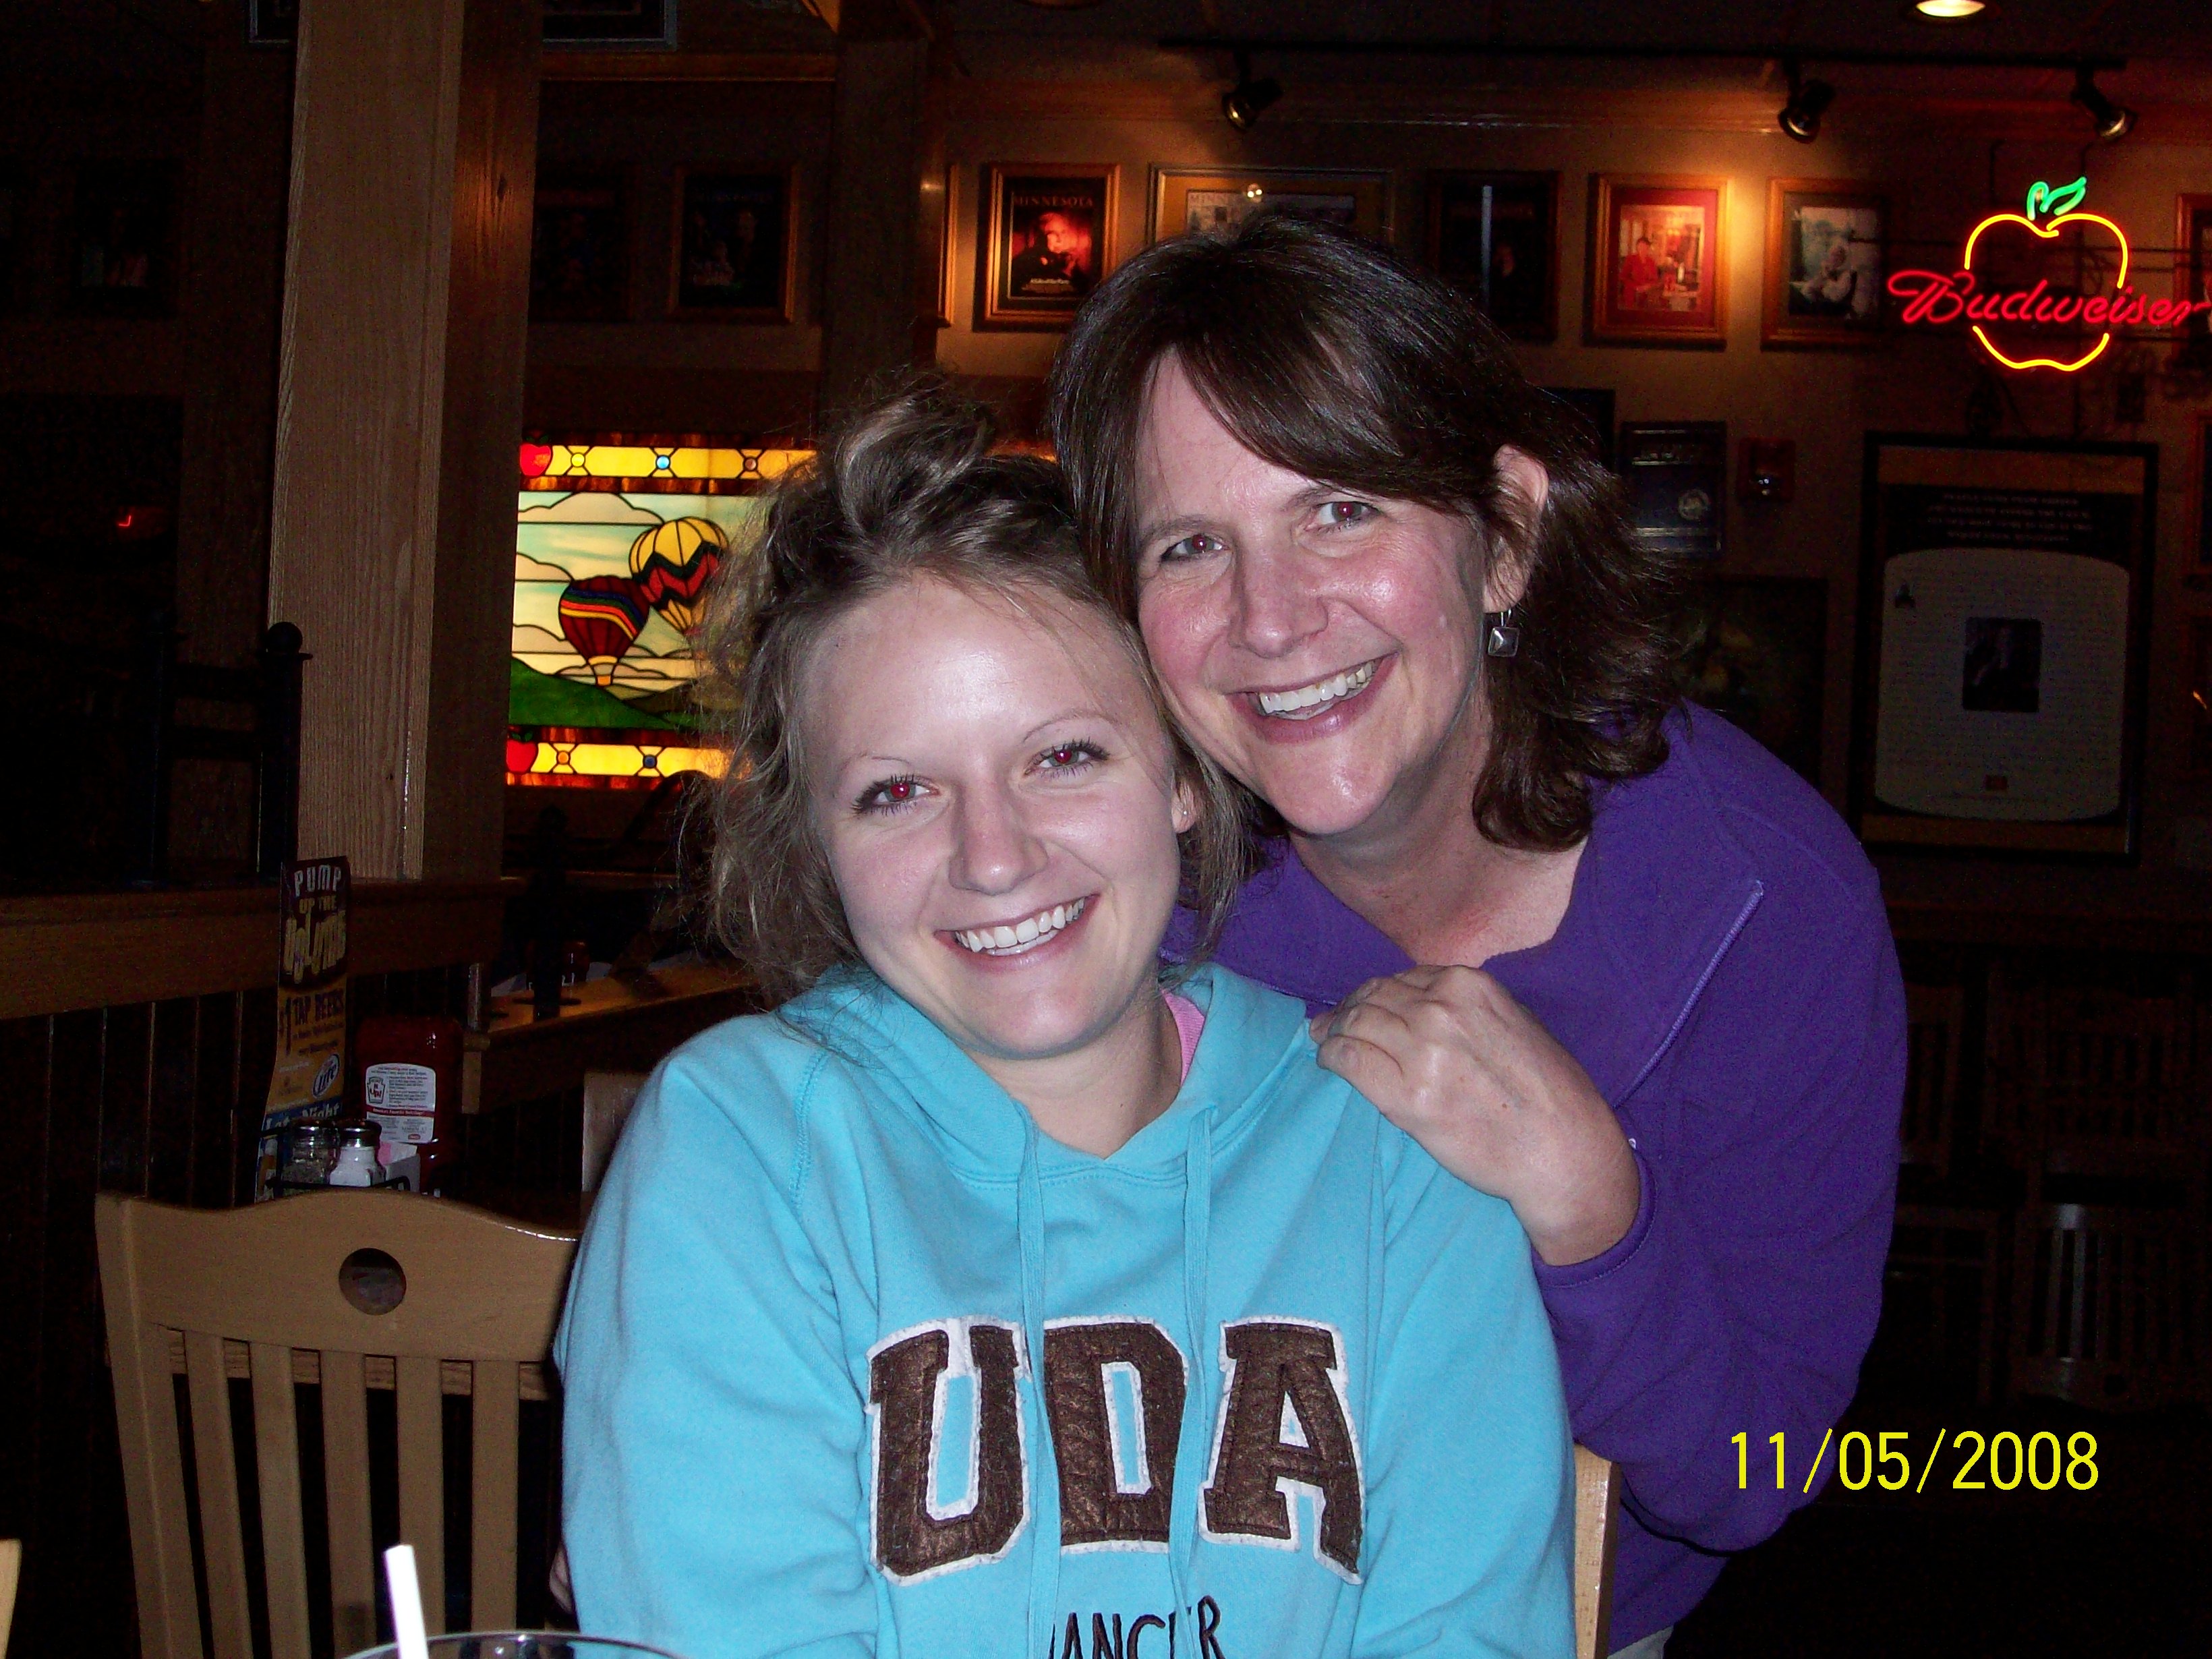 My sister Laurel and her daughter, Elizabeth at AppleBee's after a hard day of set-up.